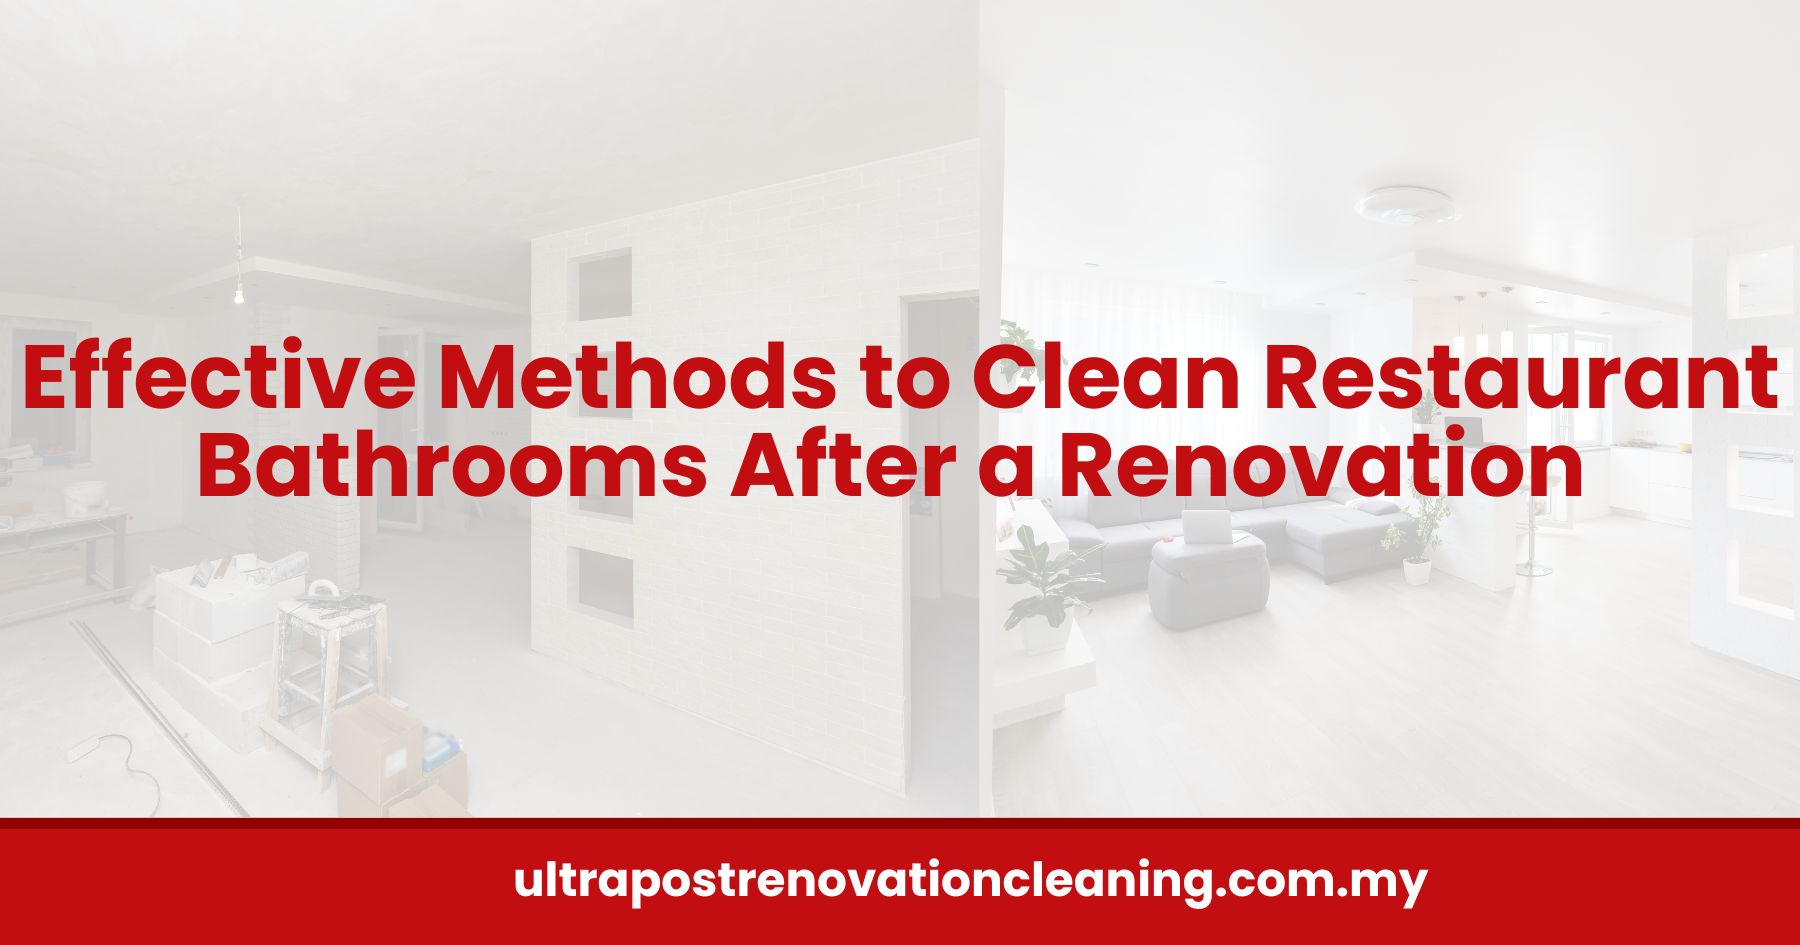 Effective Methods to Clean Restaurant Bathrooms After a Renovation